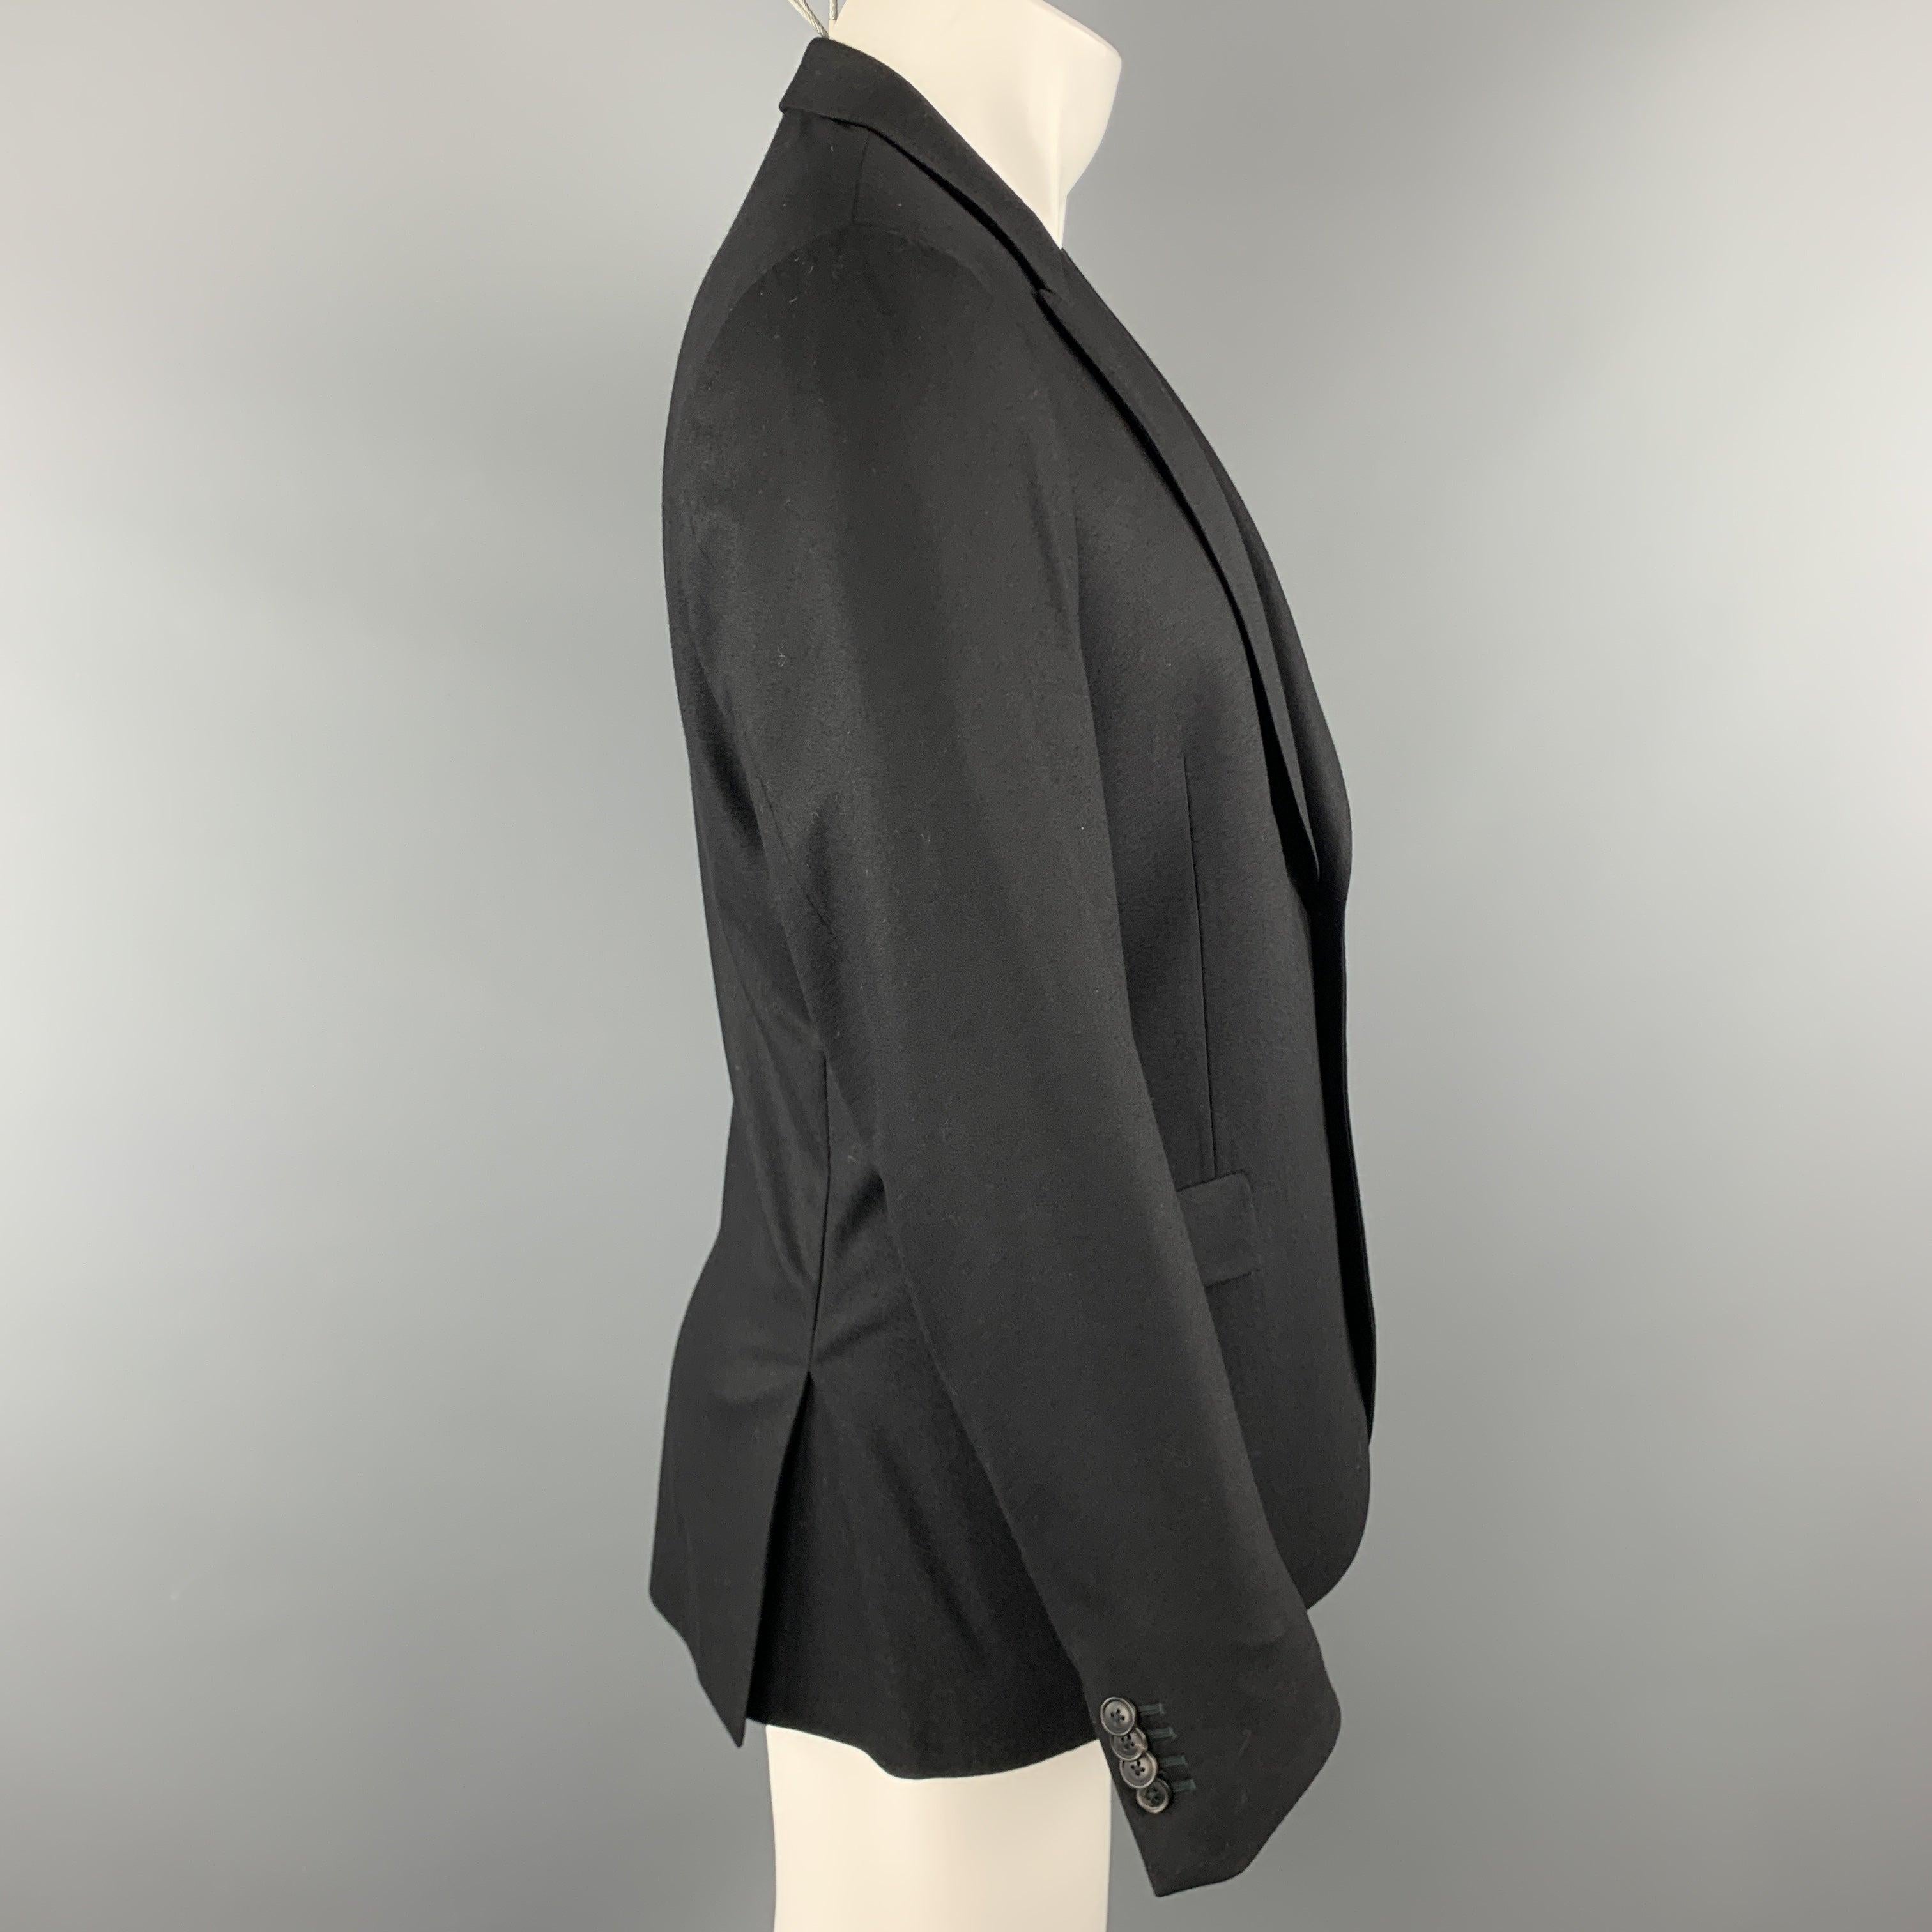 PAUL SMITH Size 40 Black Wool / Cashmere Peak Lapel Sport Coat In Excellent Condition For Sale In San Francisco, CA